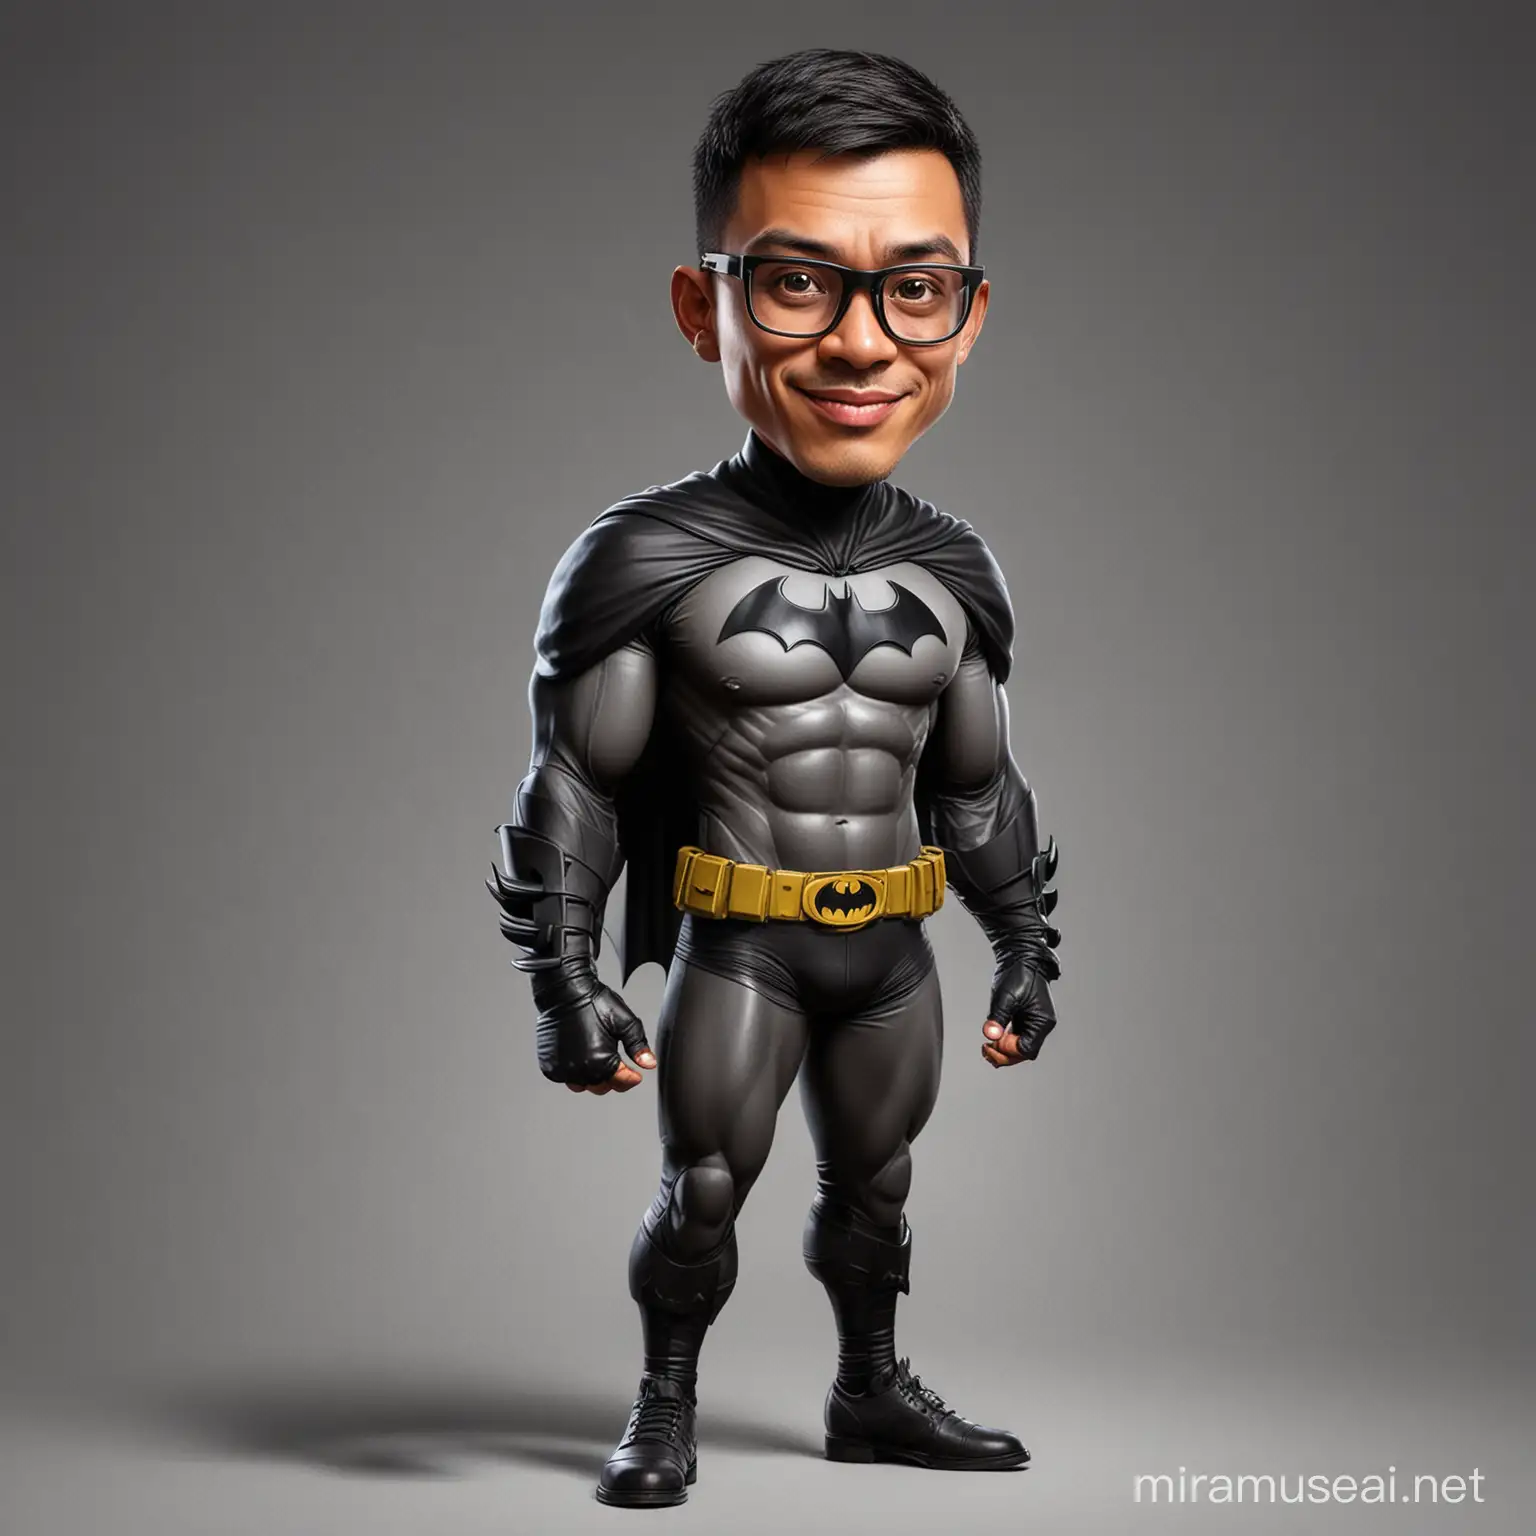 caricature potrait full body, A 29 year old Indonesian man, short thin hair, big head, wearing glasses, wearing a batman outfit, Holding a batman mask, realistic.